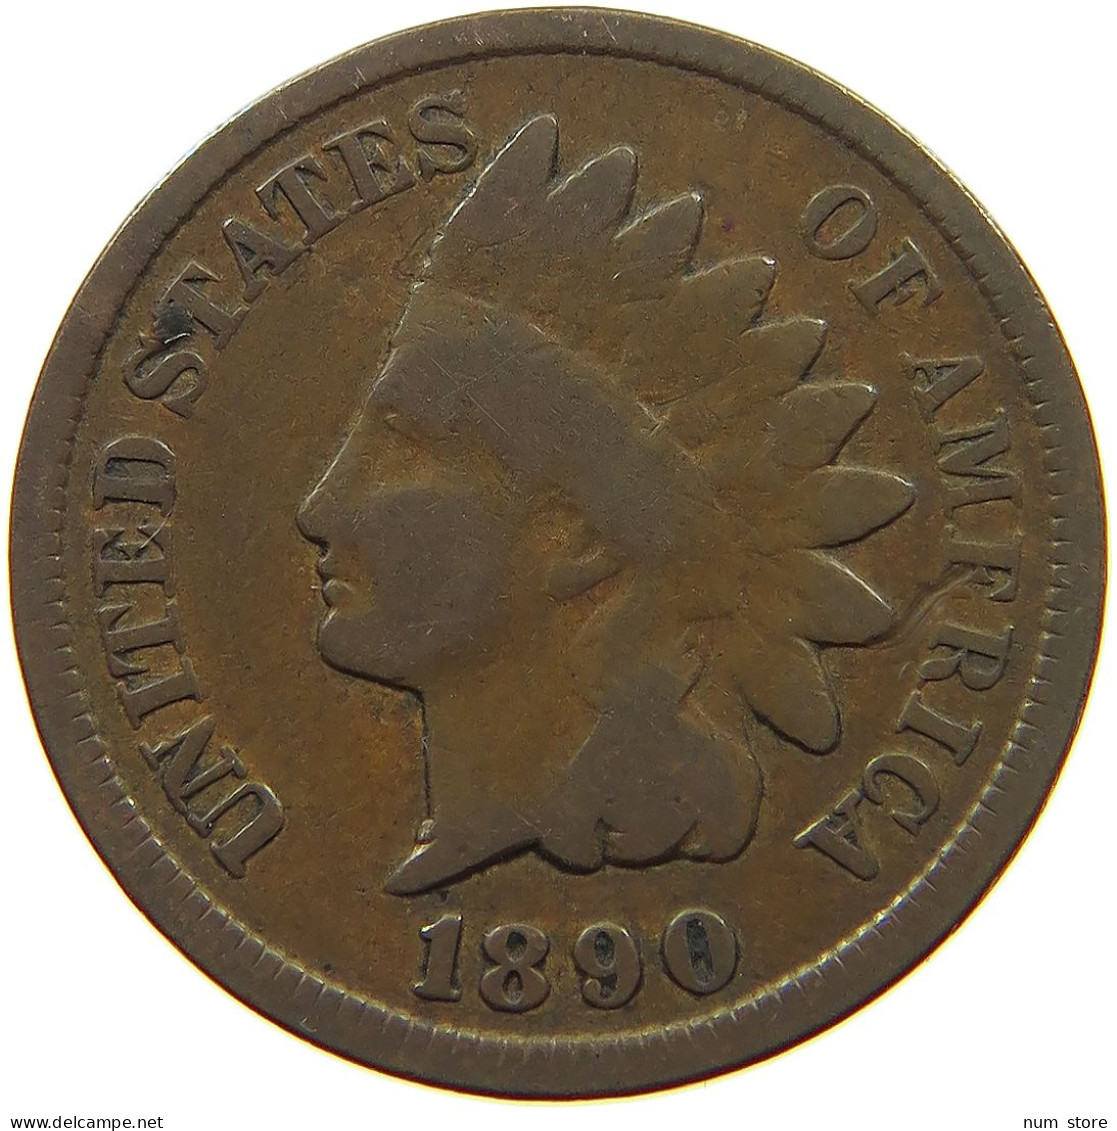 UNITED STATES OF AMERICA CENT 1890 INDIAN HEAD #s063 0185 - 1859-1909: Indian Head